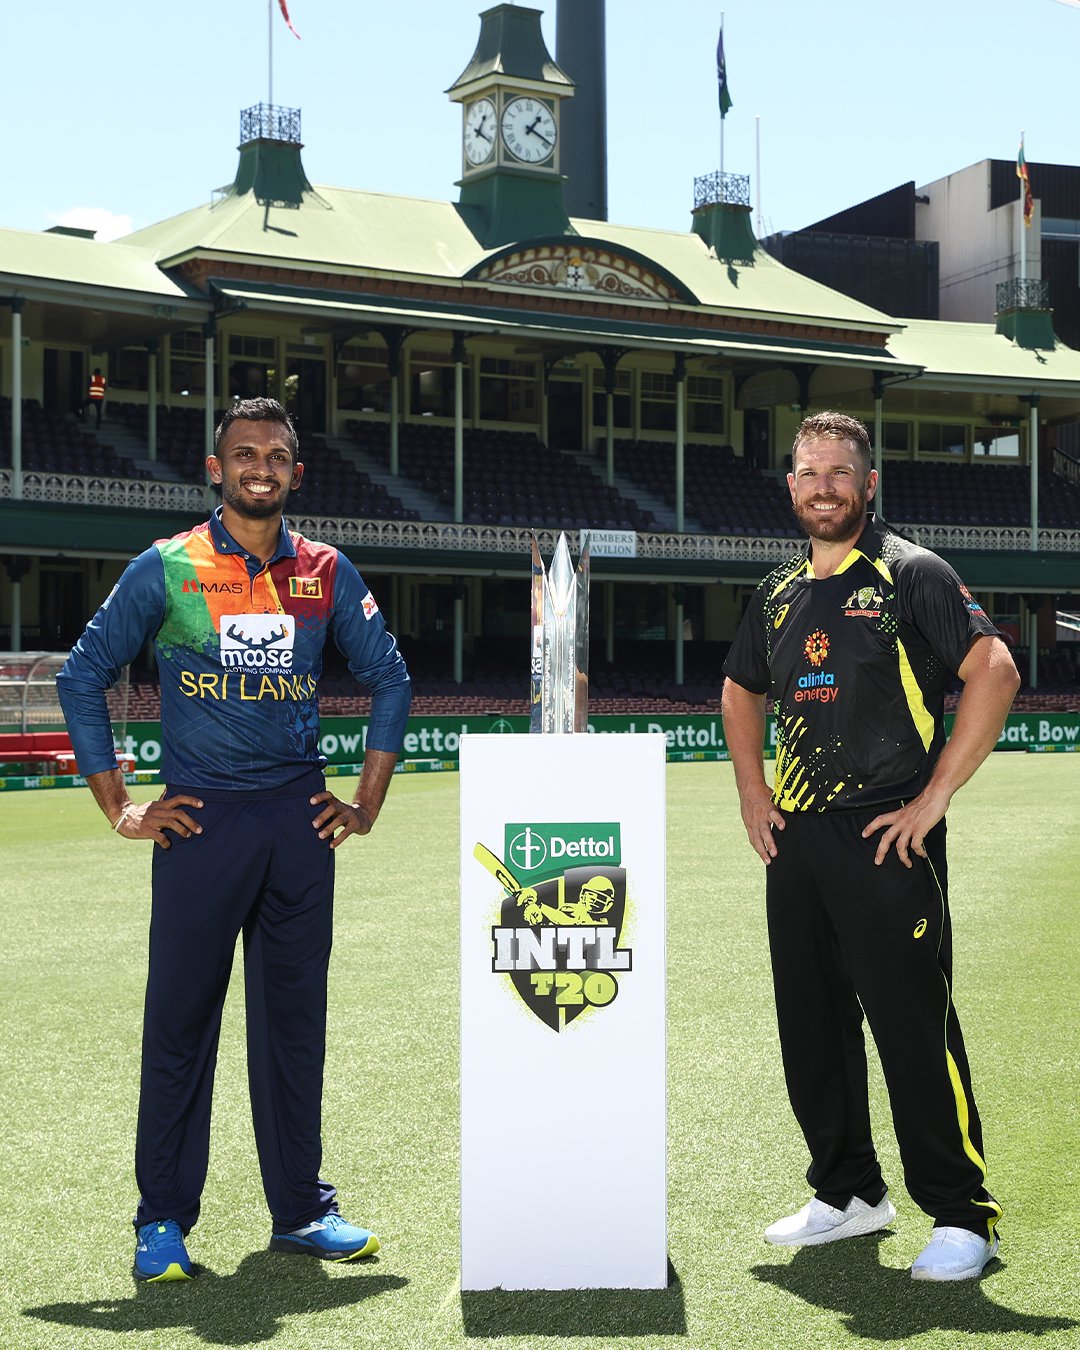 AUS vs SL Dream11 Prediction, Grand League Tips, Playing XI and Injury Updates for 4th T20I